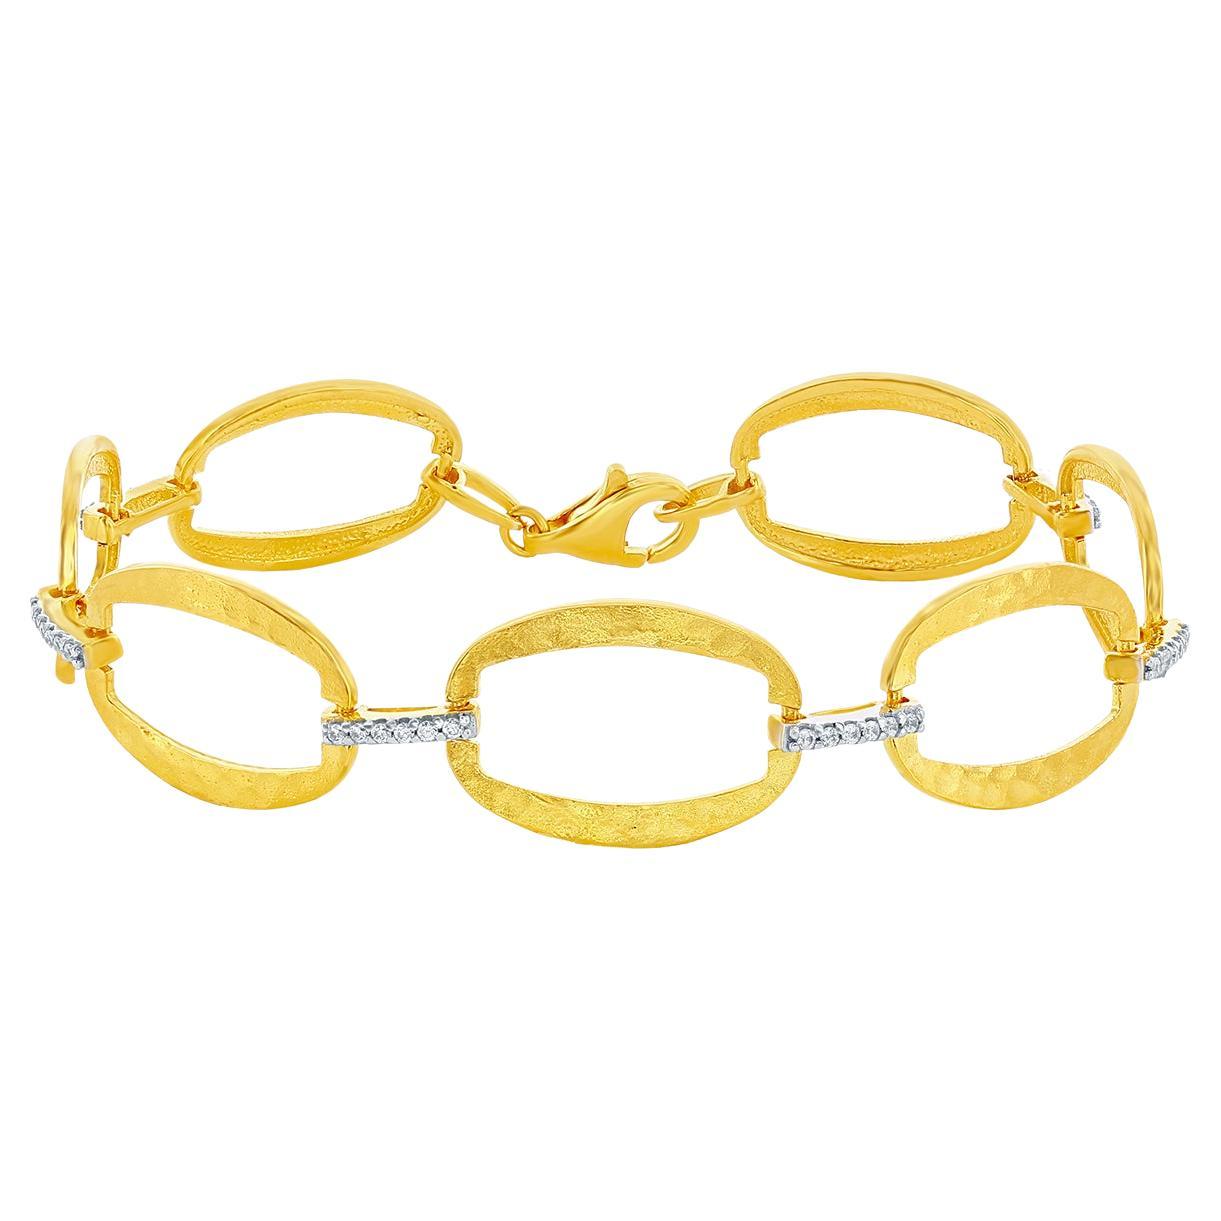 Hand-Crafted 14K Yellow Gold Open Link Bracelet